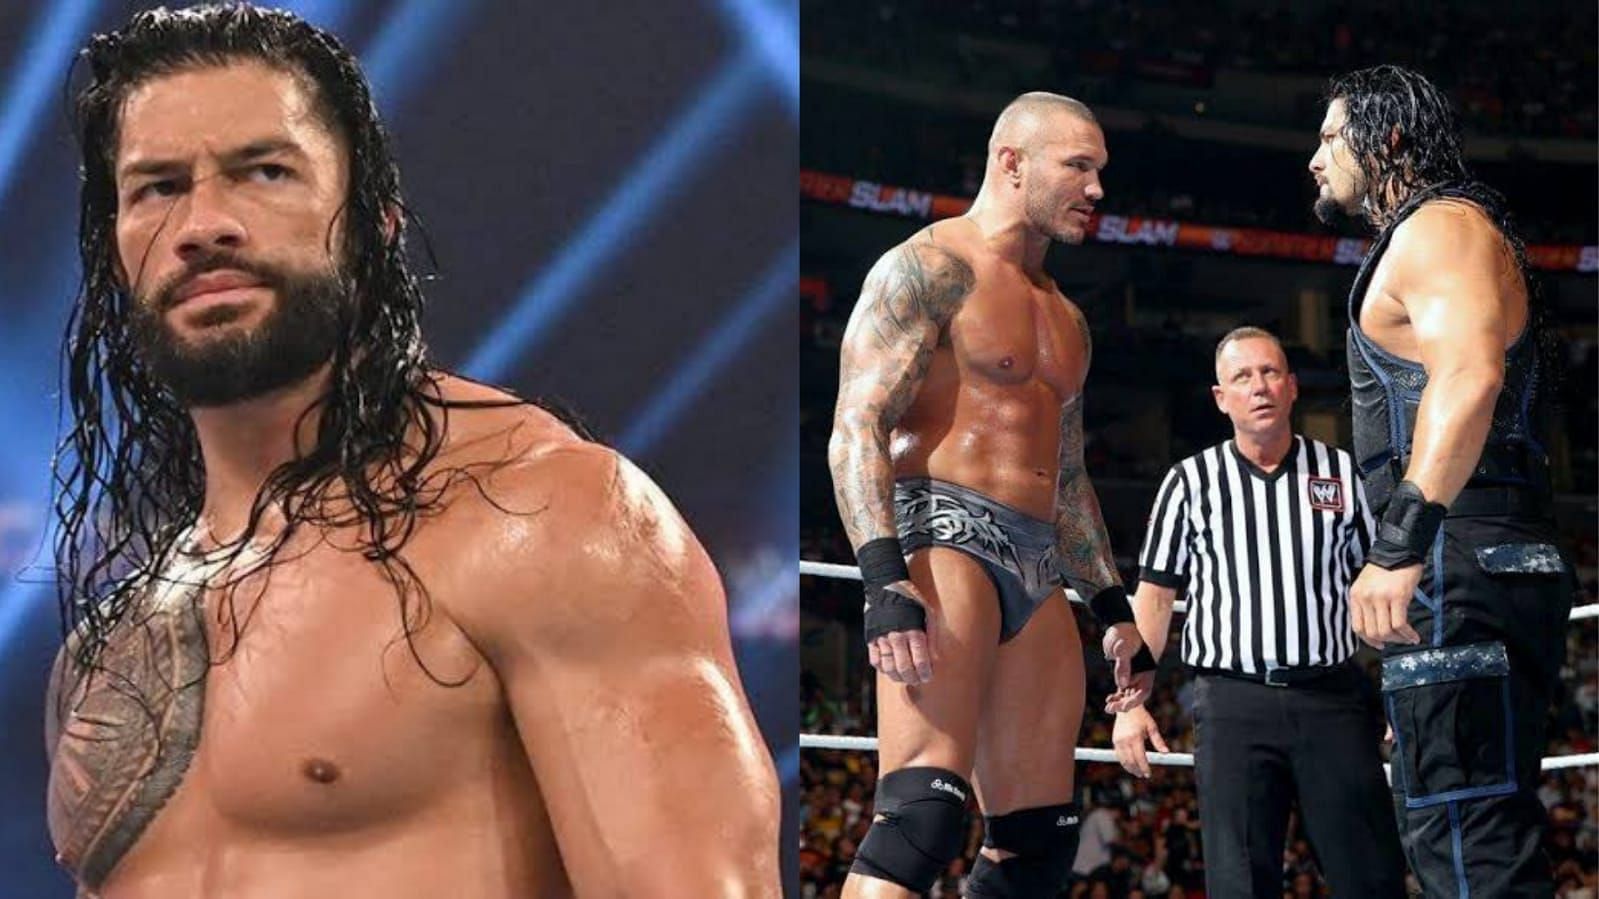 Randy Orton and Roman Reigns have previously shared the screen together in WWE